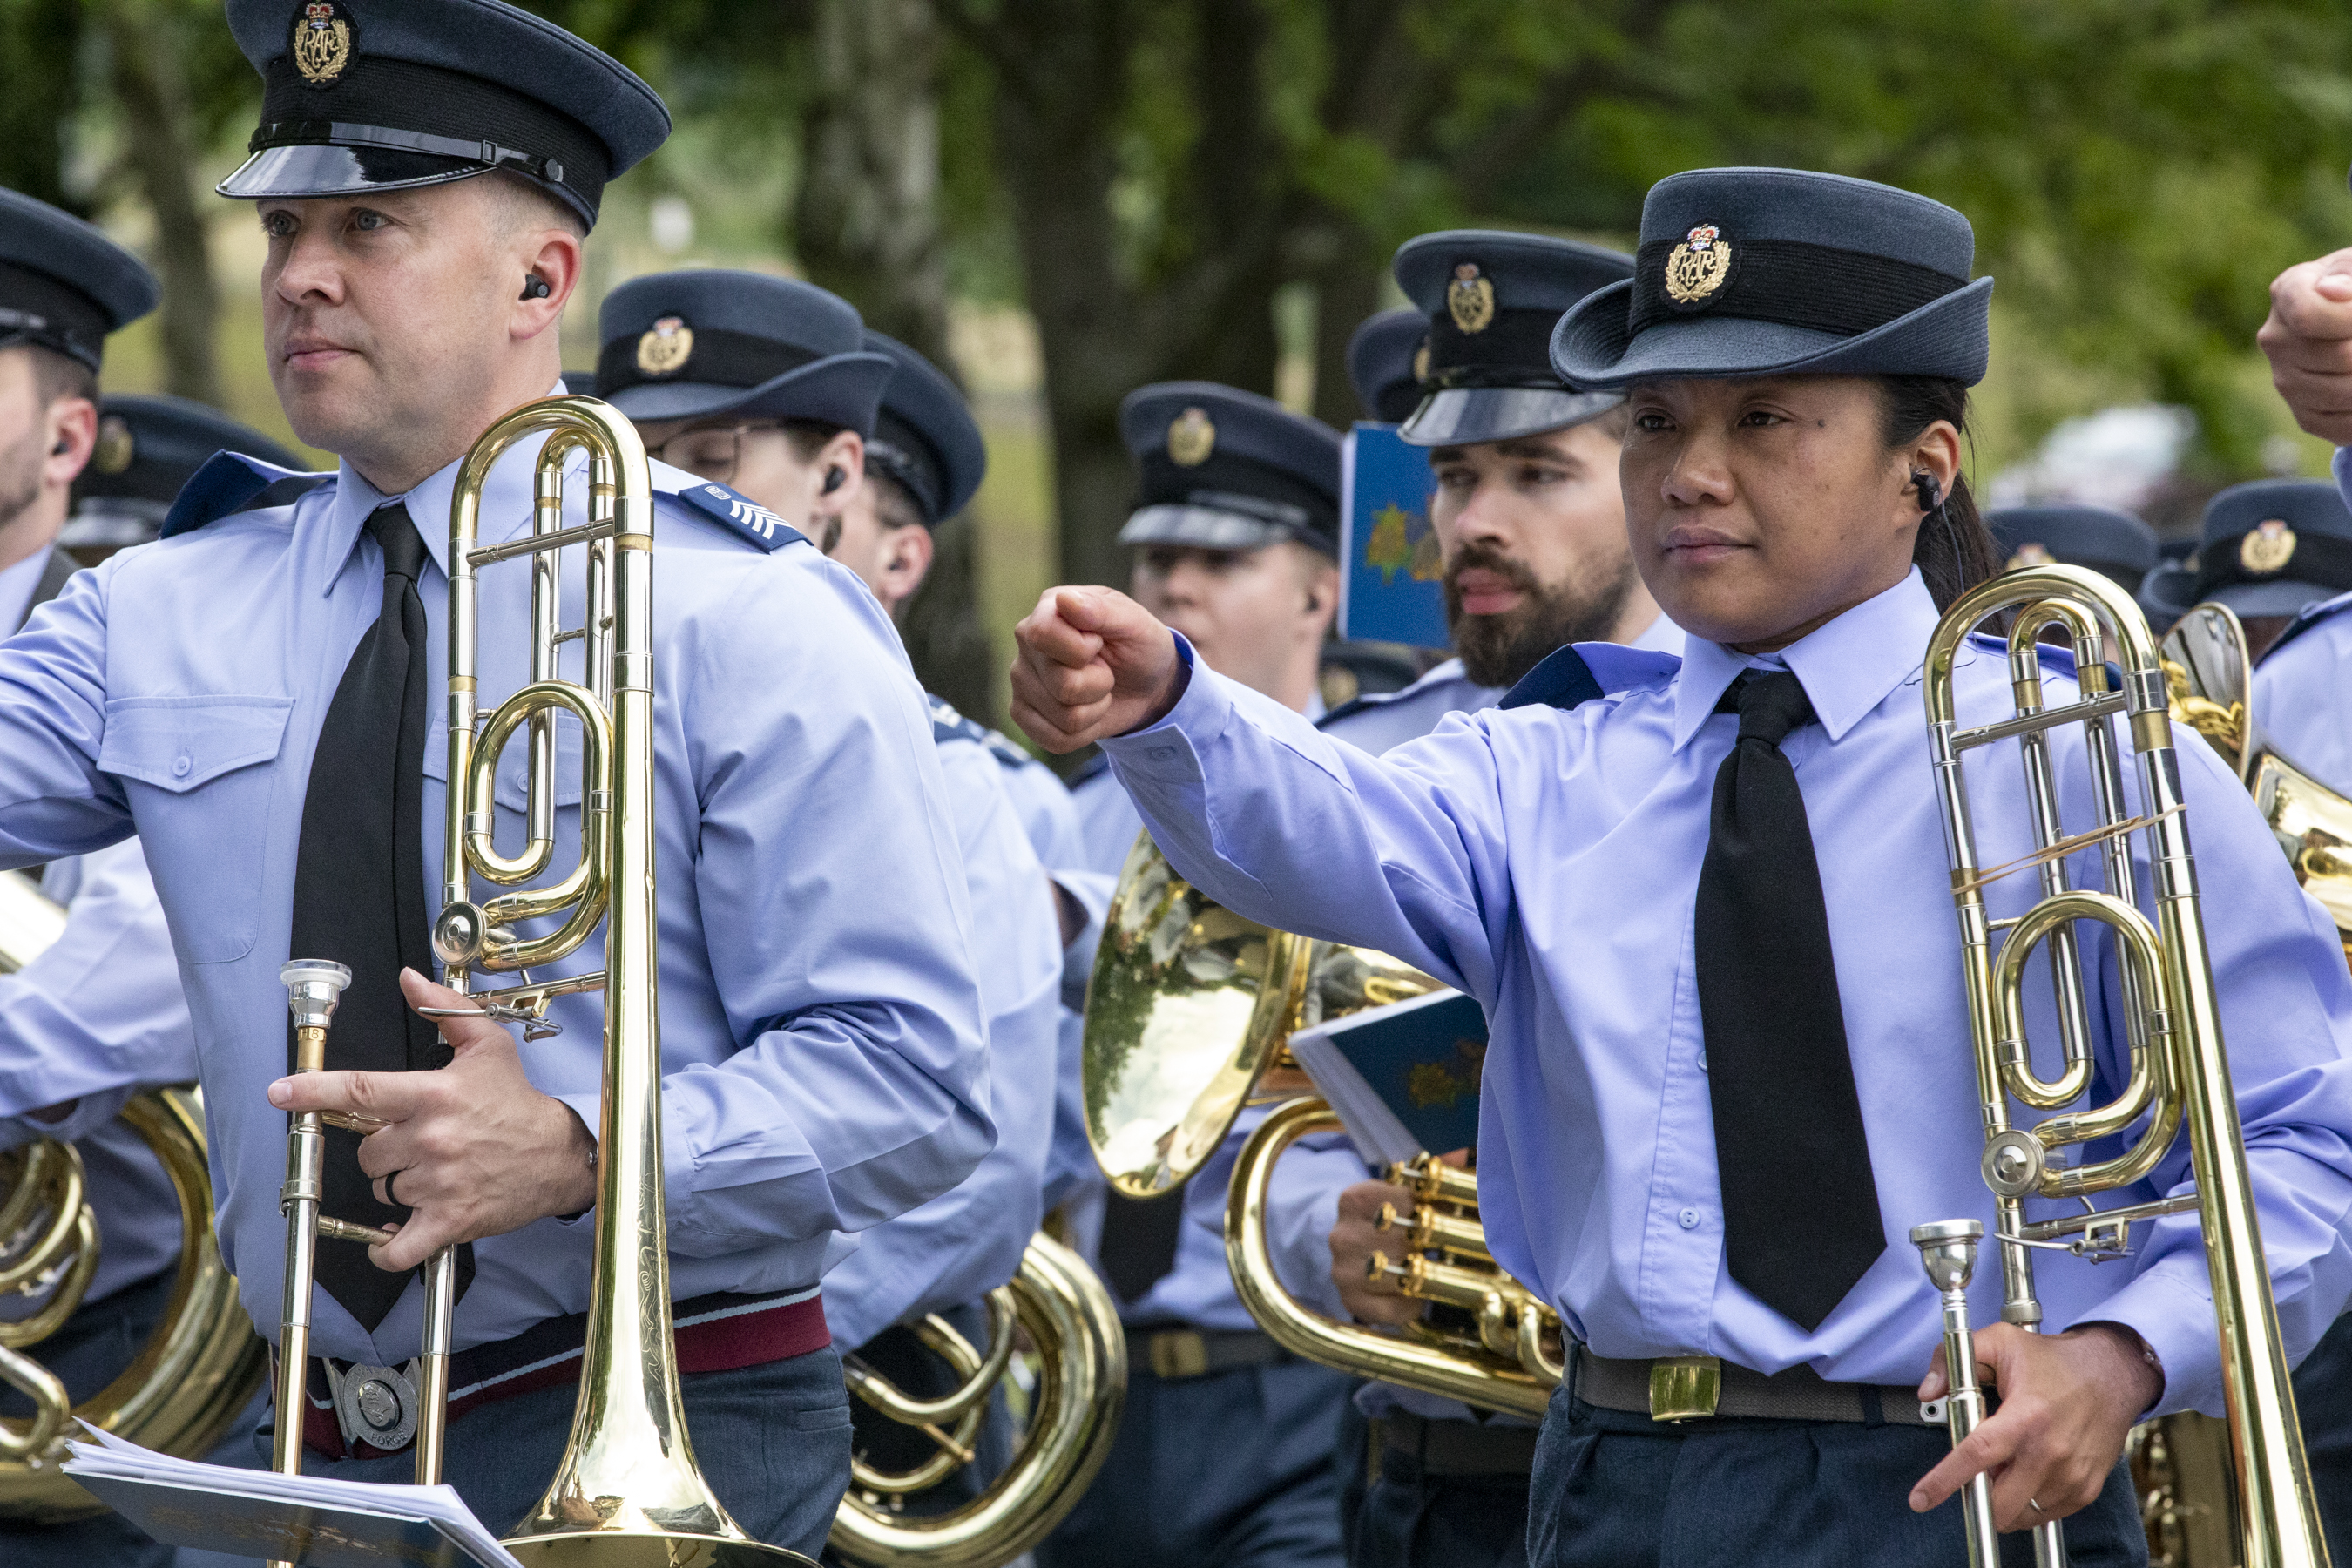 RAF Musicians practise on parade, with instruments.